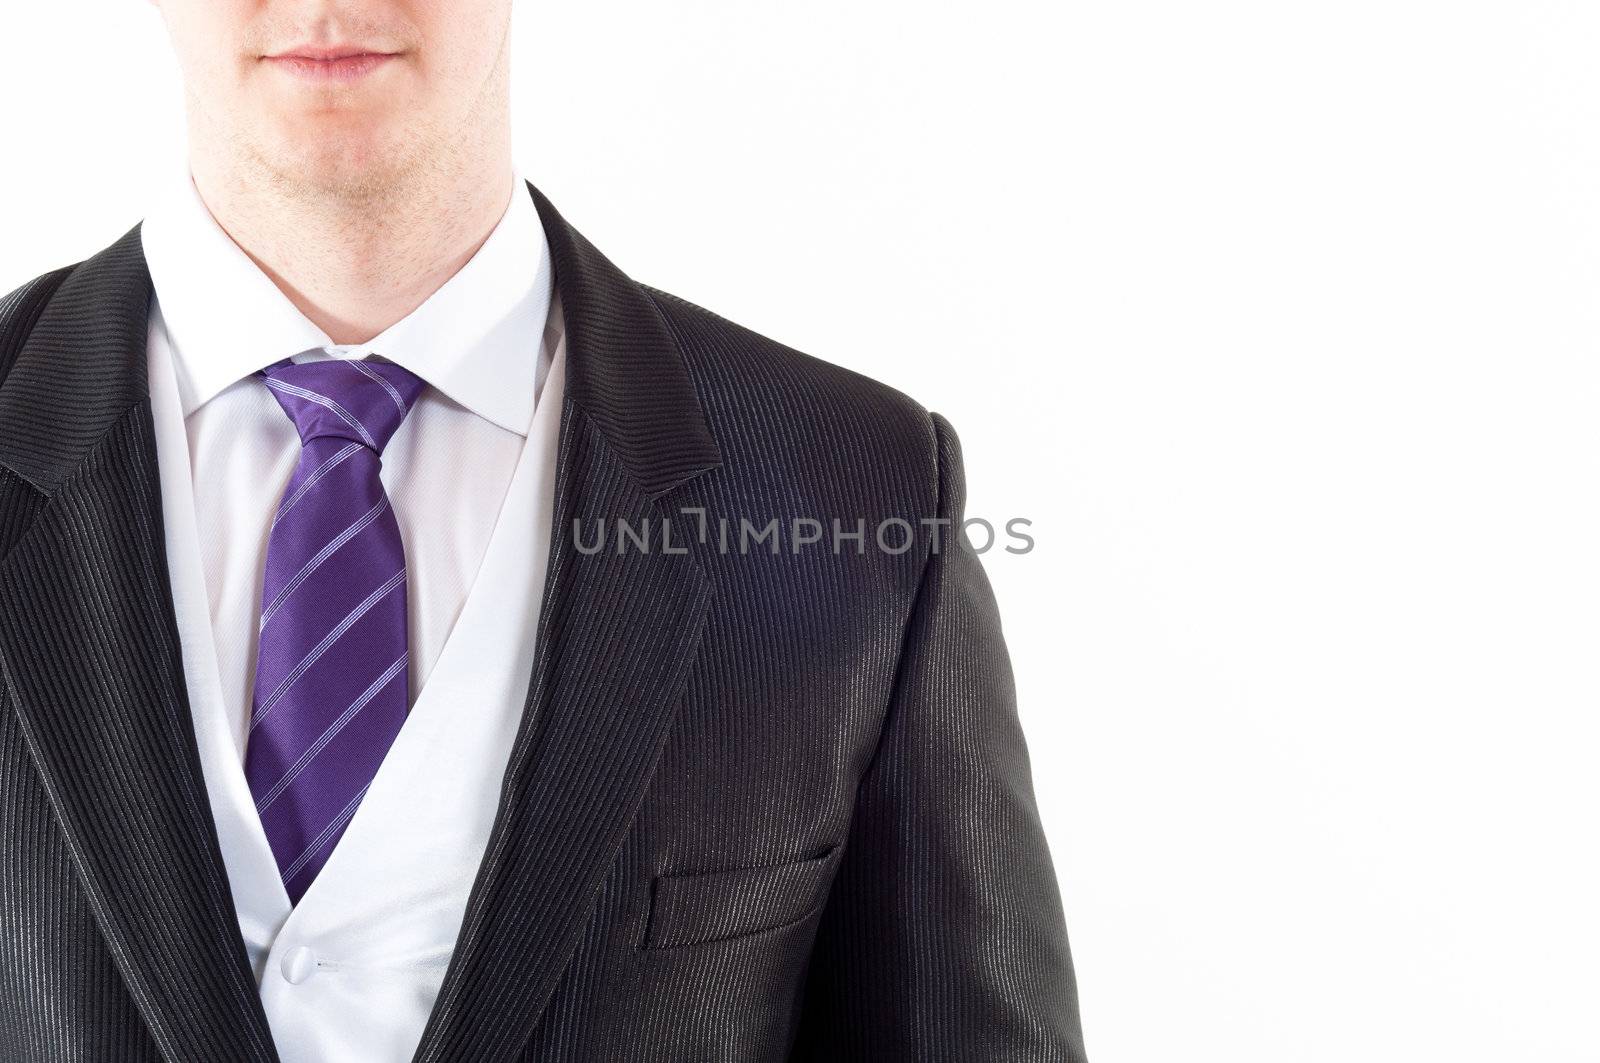 Young buisnessman with purple tie on white background